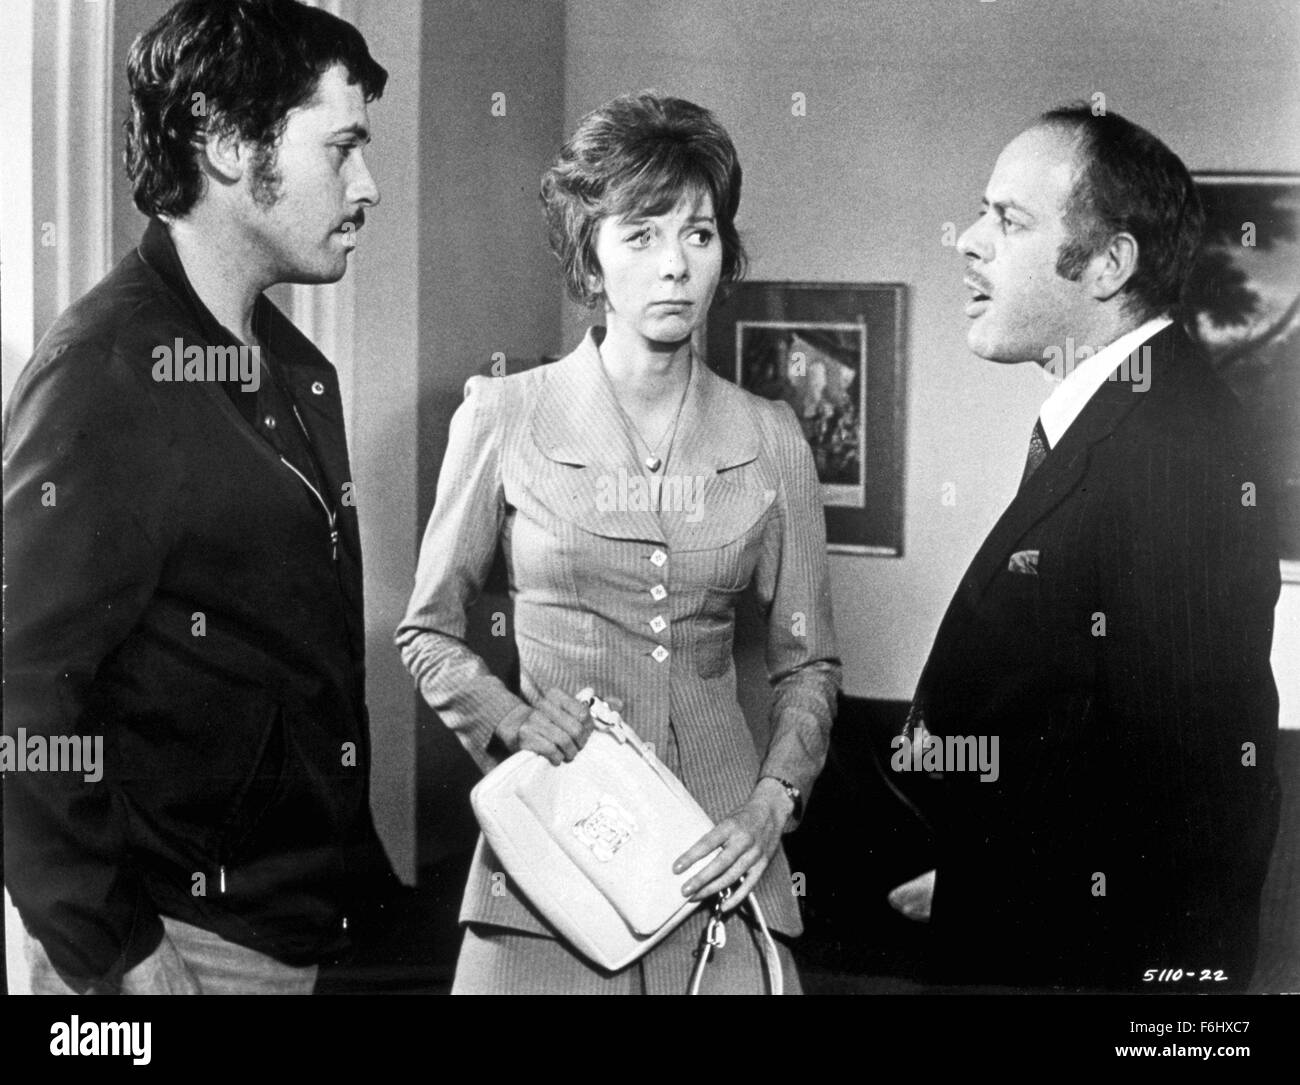 1972, Film Title: FRENZY, Director: ALFRED HITCHCOCK, Studio: UNIVERSAL, Pictured: JON FINCH, ALFRED HITCHCOCK, ANNA MASSEY. (Credit Image: SNAP) Stock Photo